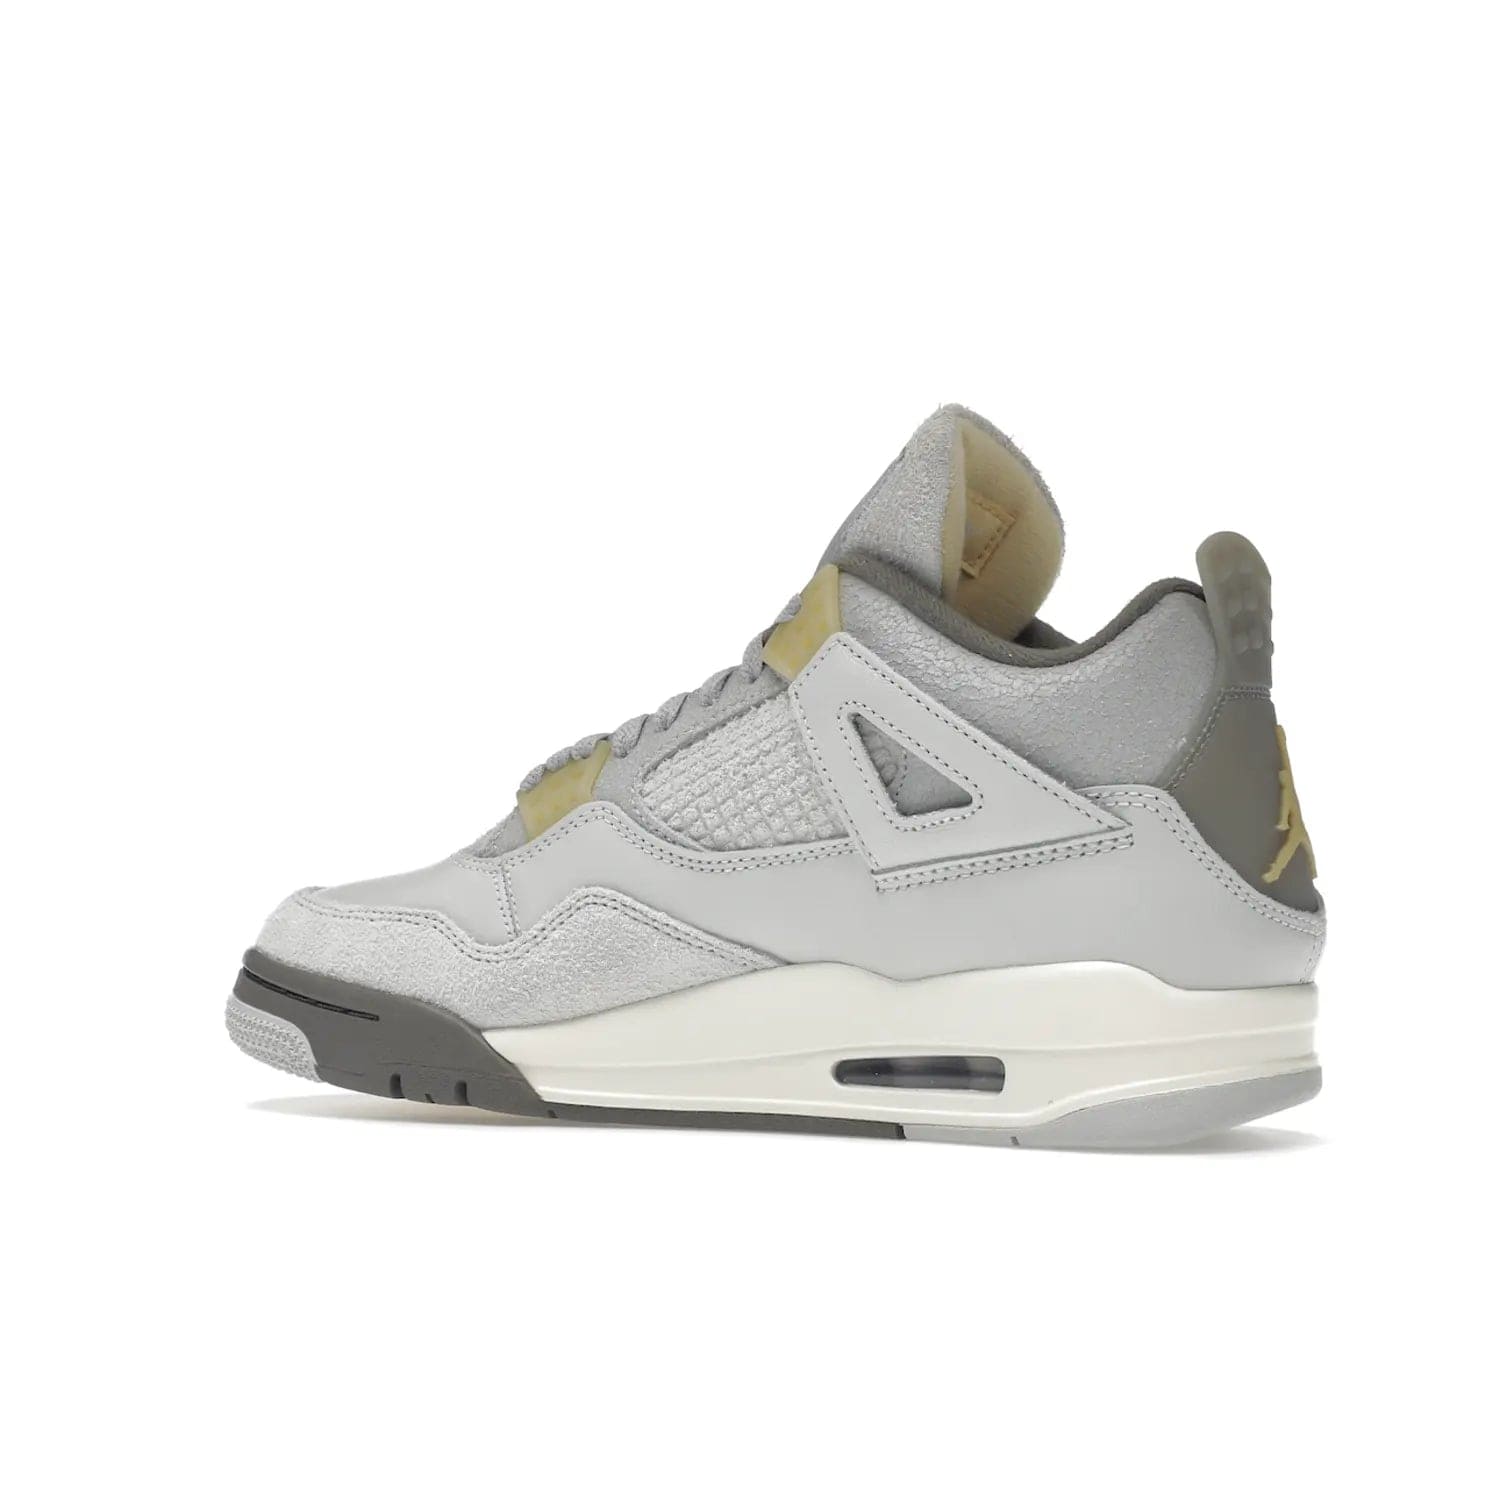 Jordan 4 Retro SE Craft Photon Dust - Image 22 - Only at www.BallersClubKickz.com - Upgrade your shoe collection with the Air Jordan 4 Retro SE Craft Photon Dust. This luxurious sneaker features a combination of suede and leather with unique grey tones like Photon Dust, Pale Vanilla, Off White, Grey Fog, Flat Pewter, and Sail. Available February 11, 2023.